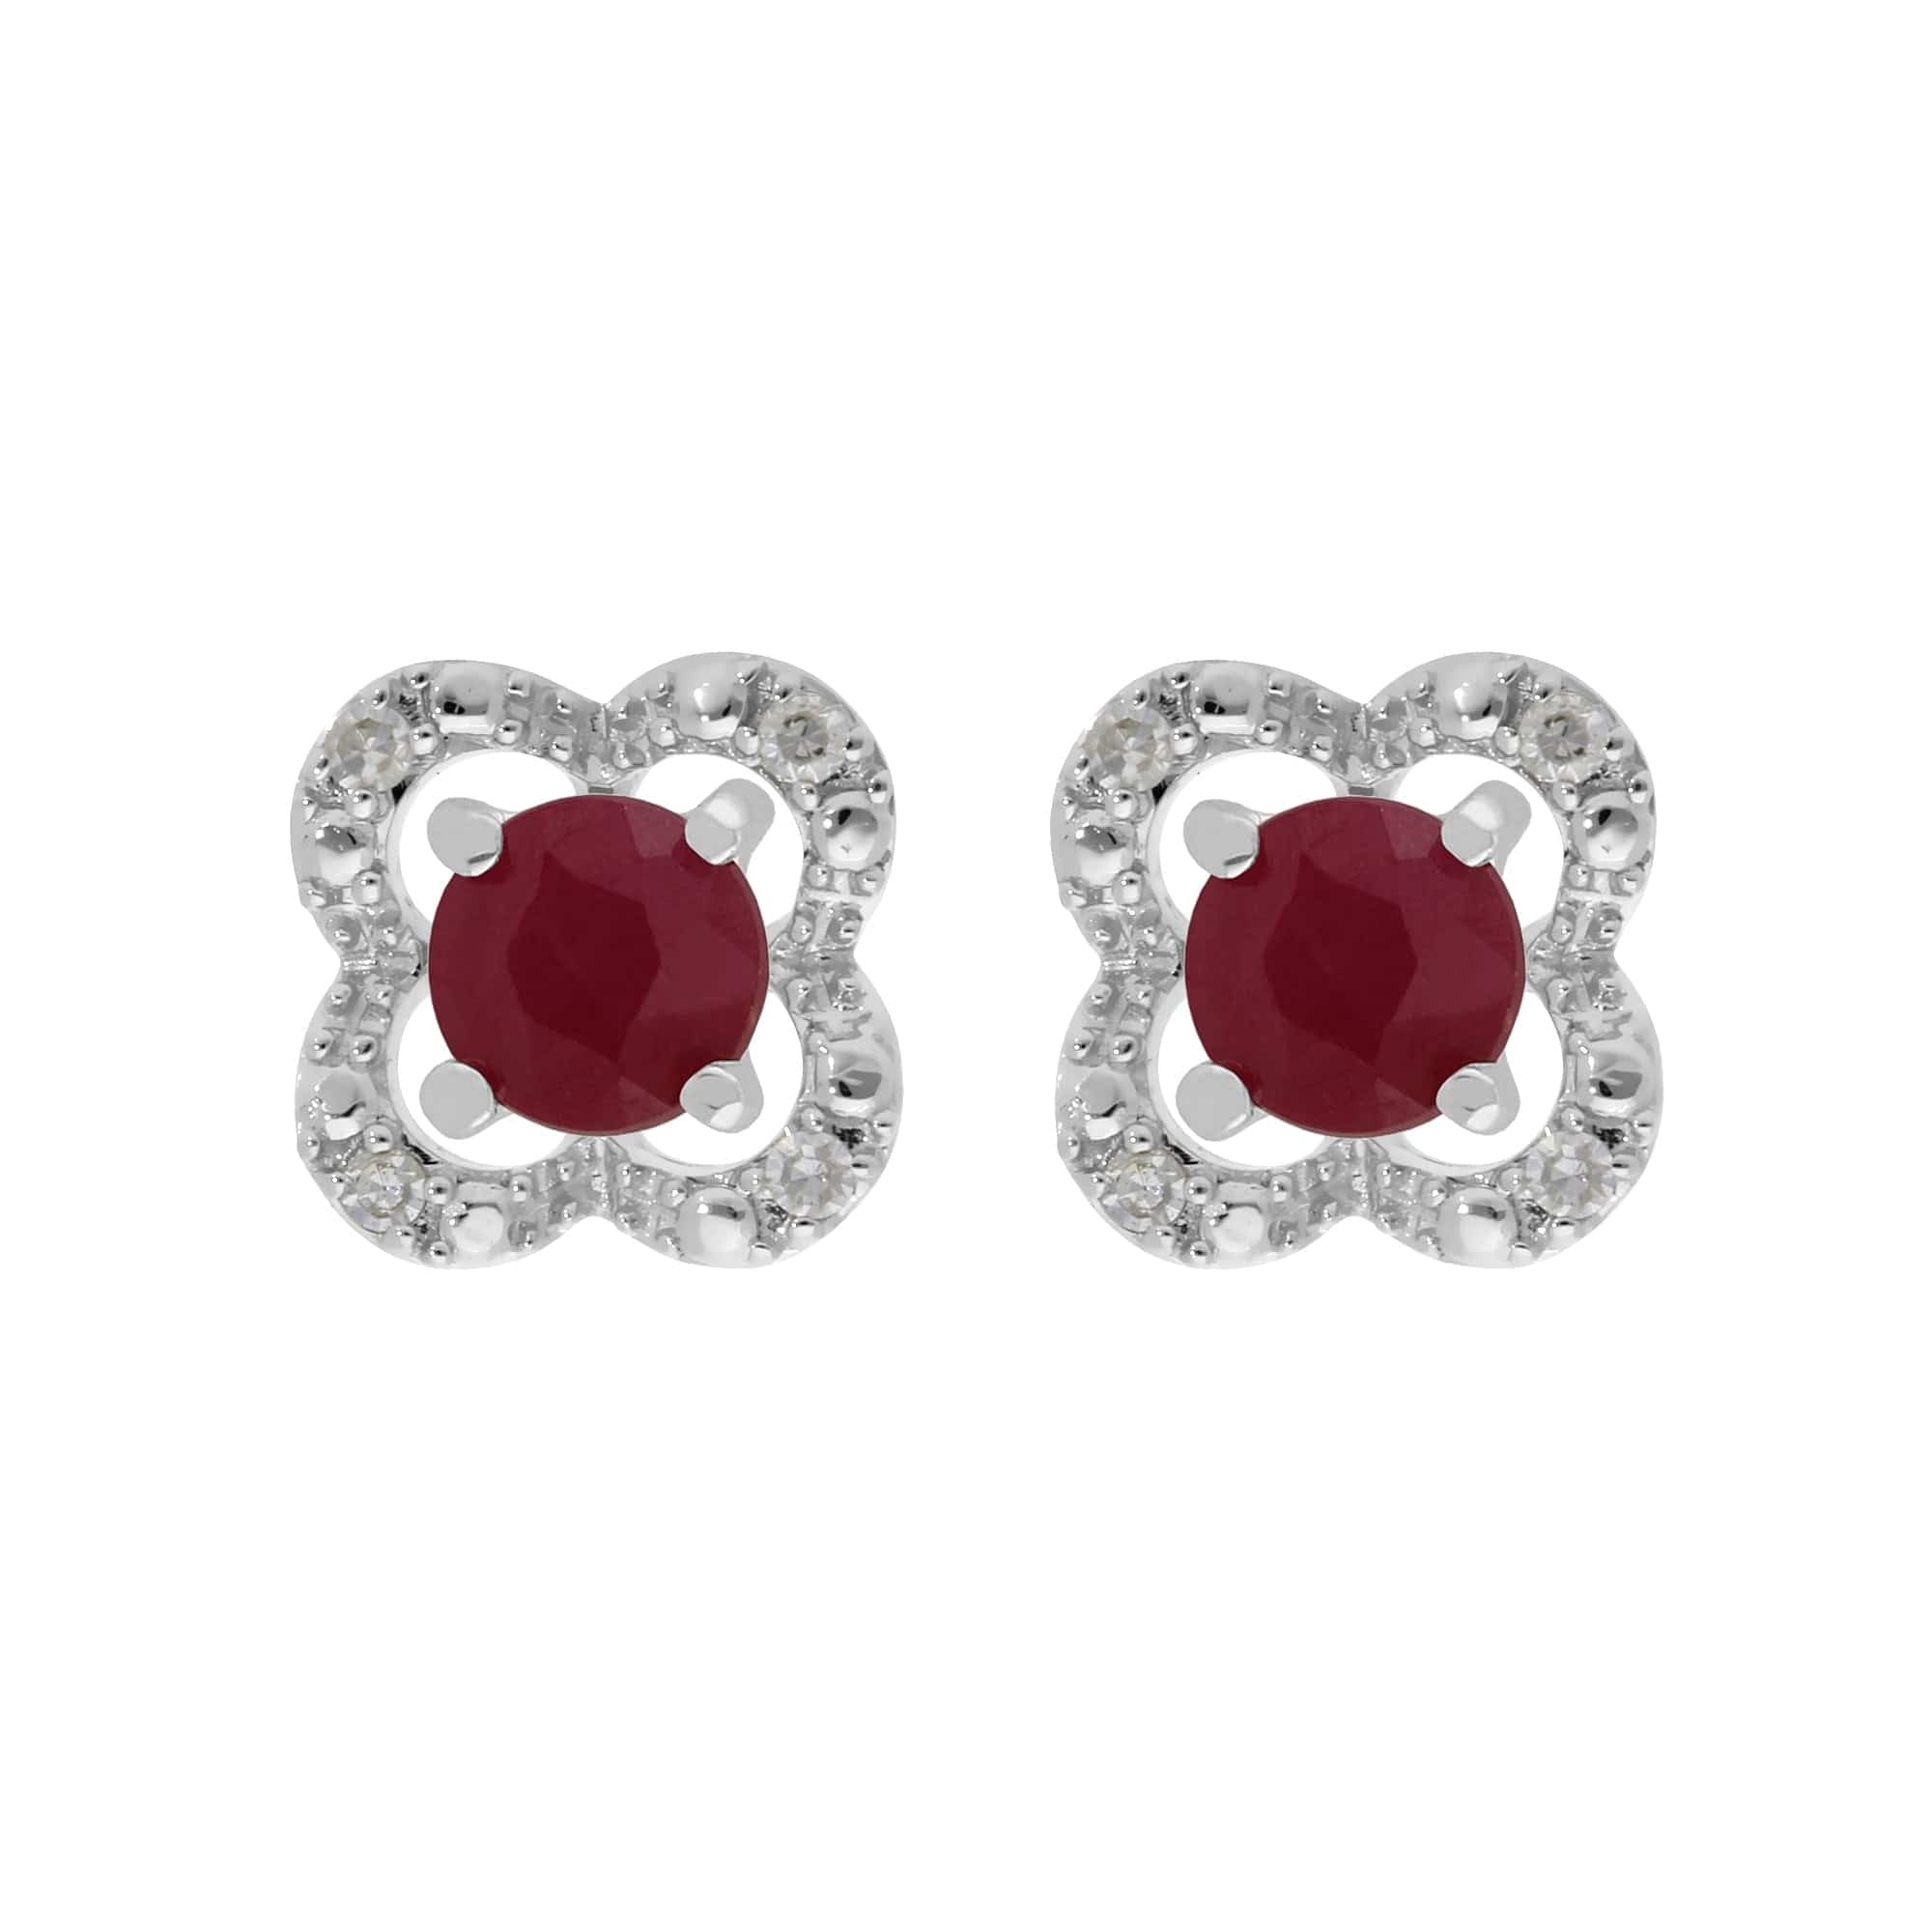 11622-162E0244019 Classic Round Ruby Stud Earrings with Detachable Diamond Flower Ear Jacket in 9ct White Gold 1